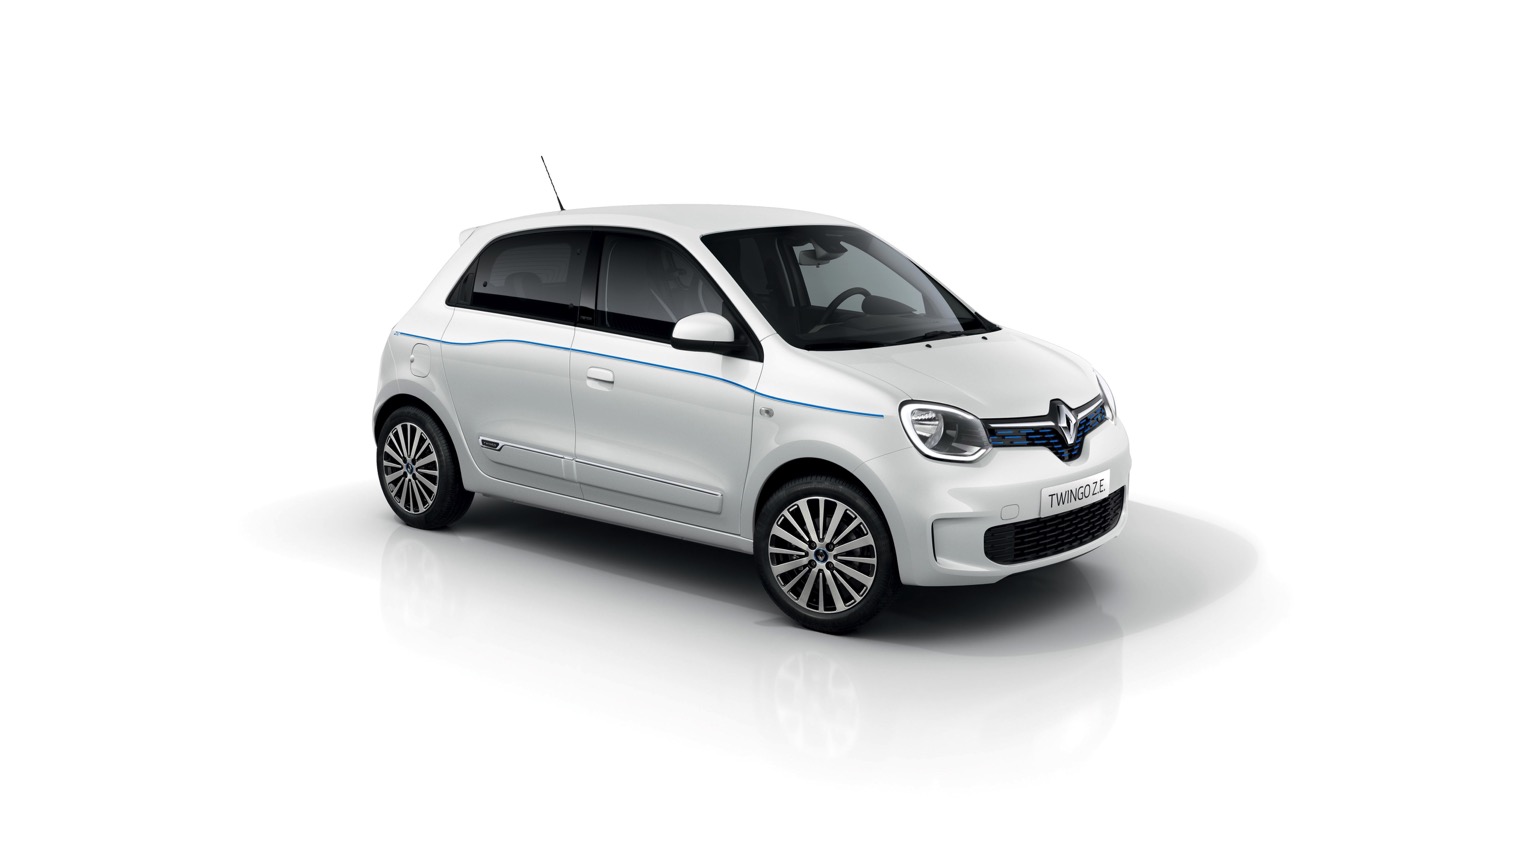 Renault Twingo Electric Review